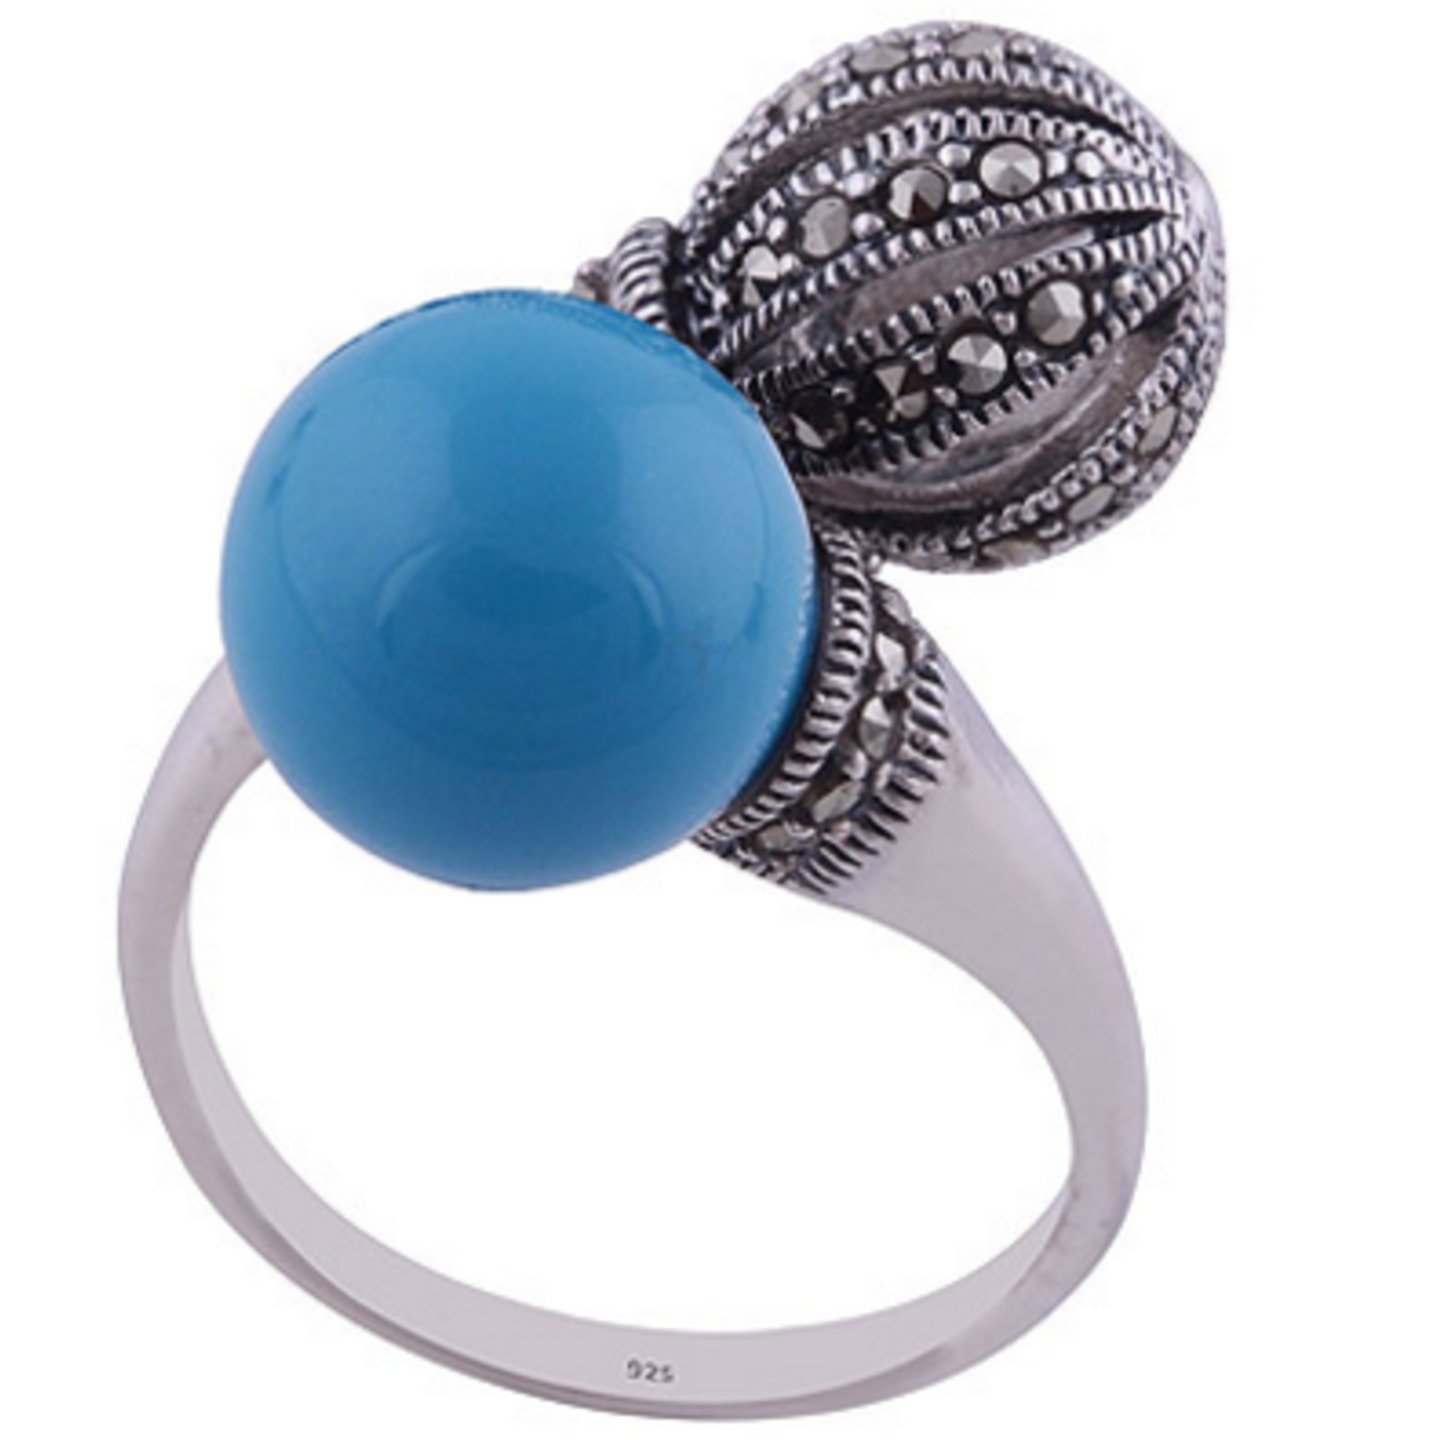 The Turquoise n Marcasite Sphere Silver Ring